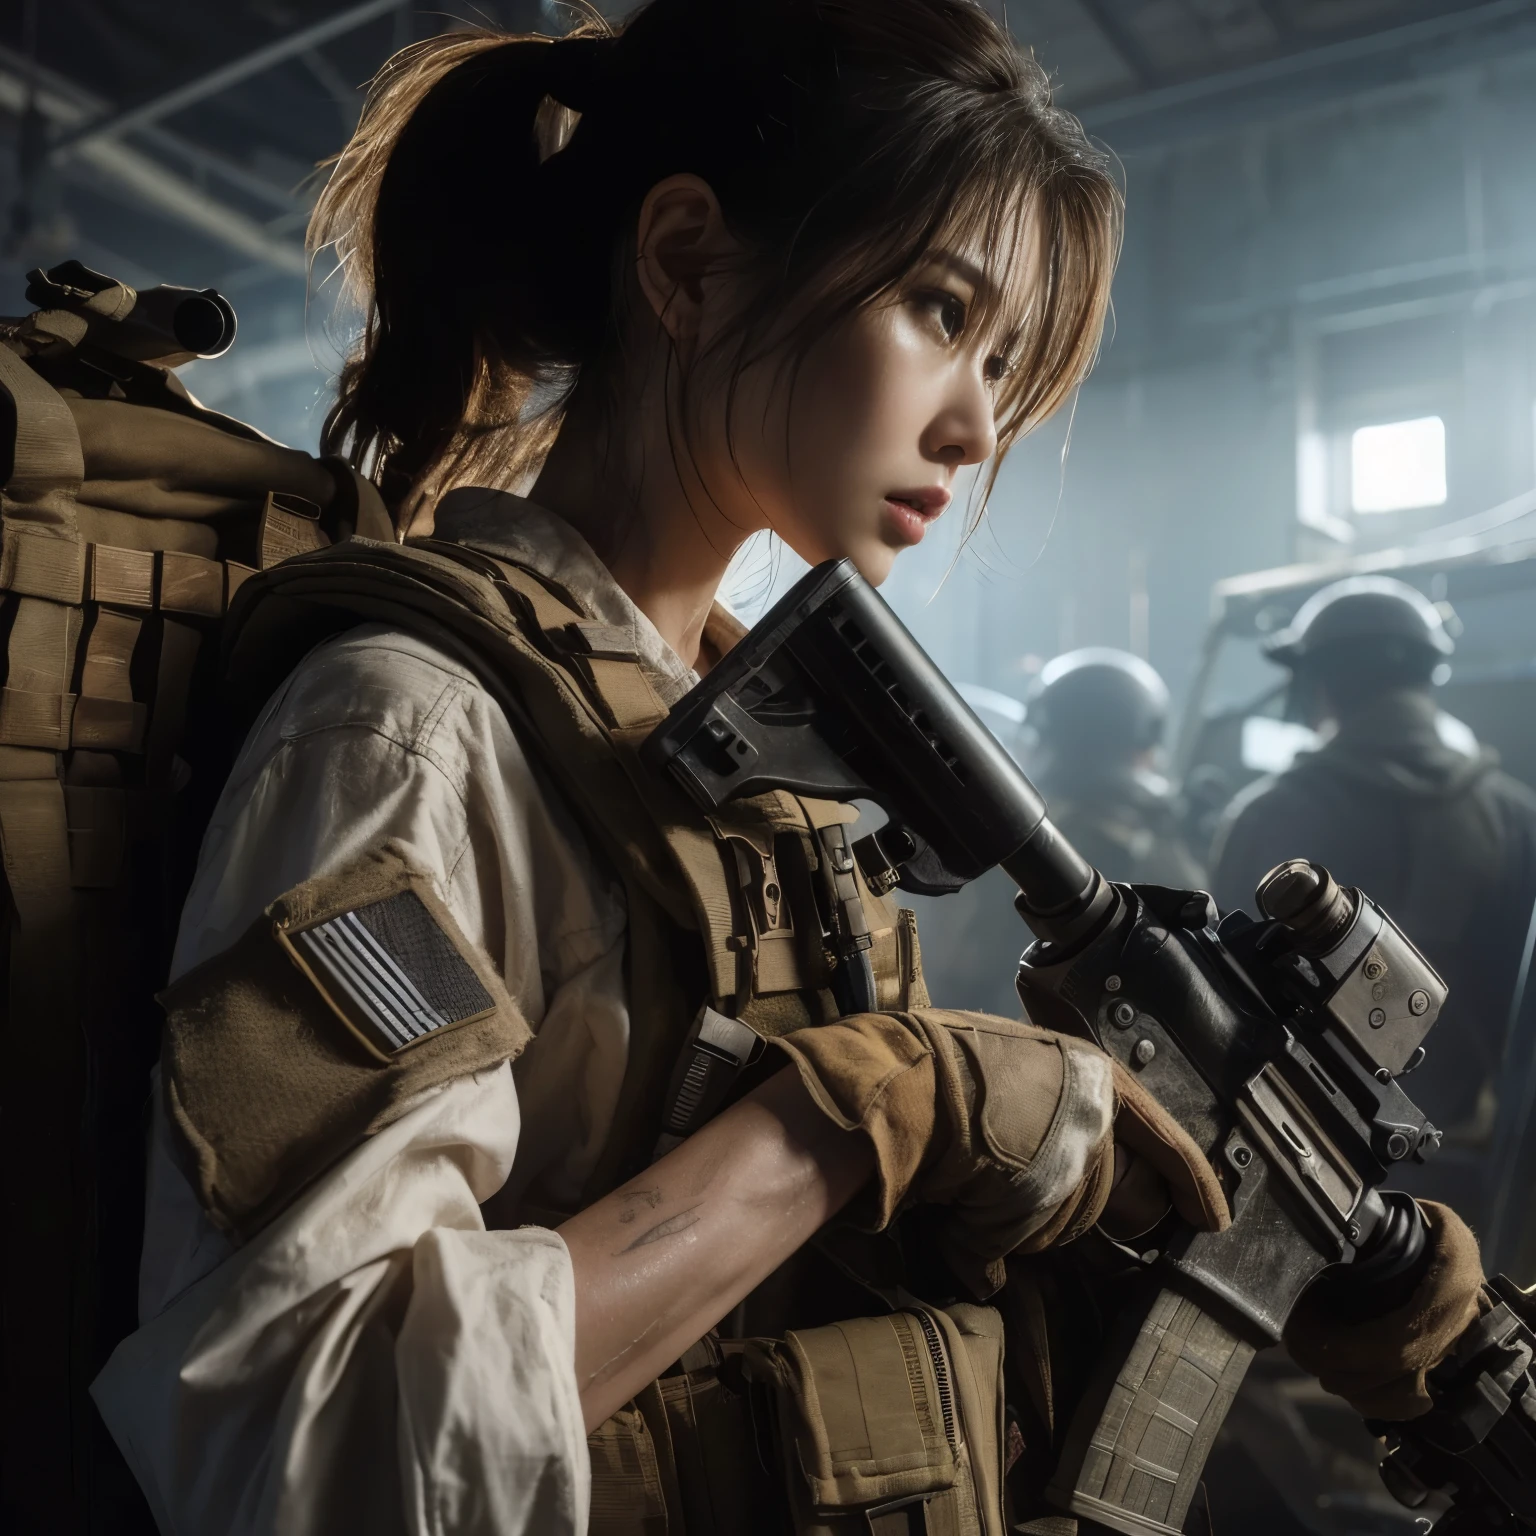 ８K,realistic photo、realistic skin texture、A beautiful Japanese woman belonging to the American military is in an abandoned factory that is no longer in use.、The roof collapses and light shines in、Dust is flying、A large machine placed casually is broken.、bulletproof vest、Holding an automatic rifle、with caution、Backpack、wearing a baseball cap、It is dirty、tattoo、moving action pose、muscle、dramatic composition、Zoom out